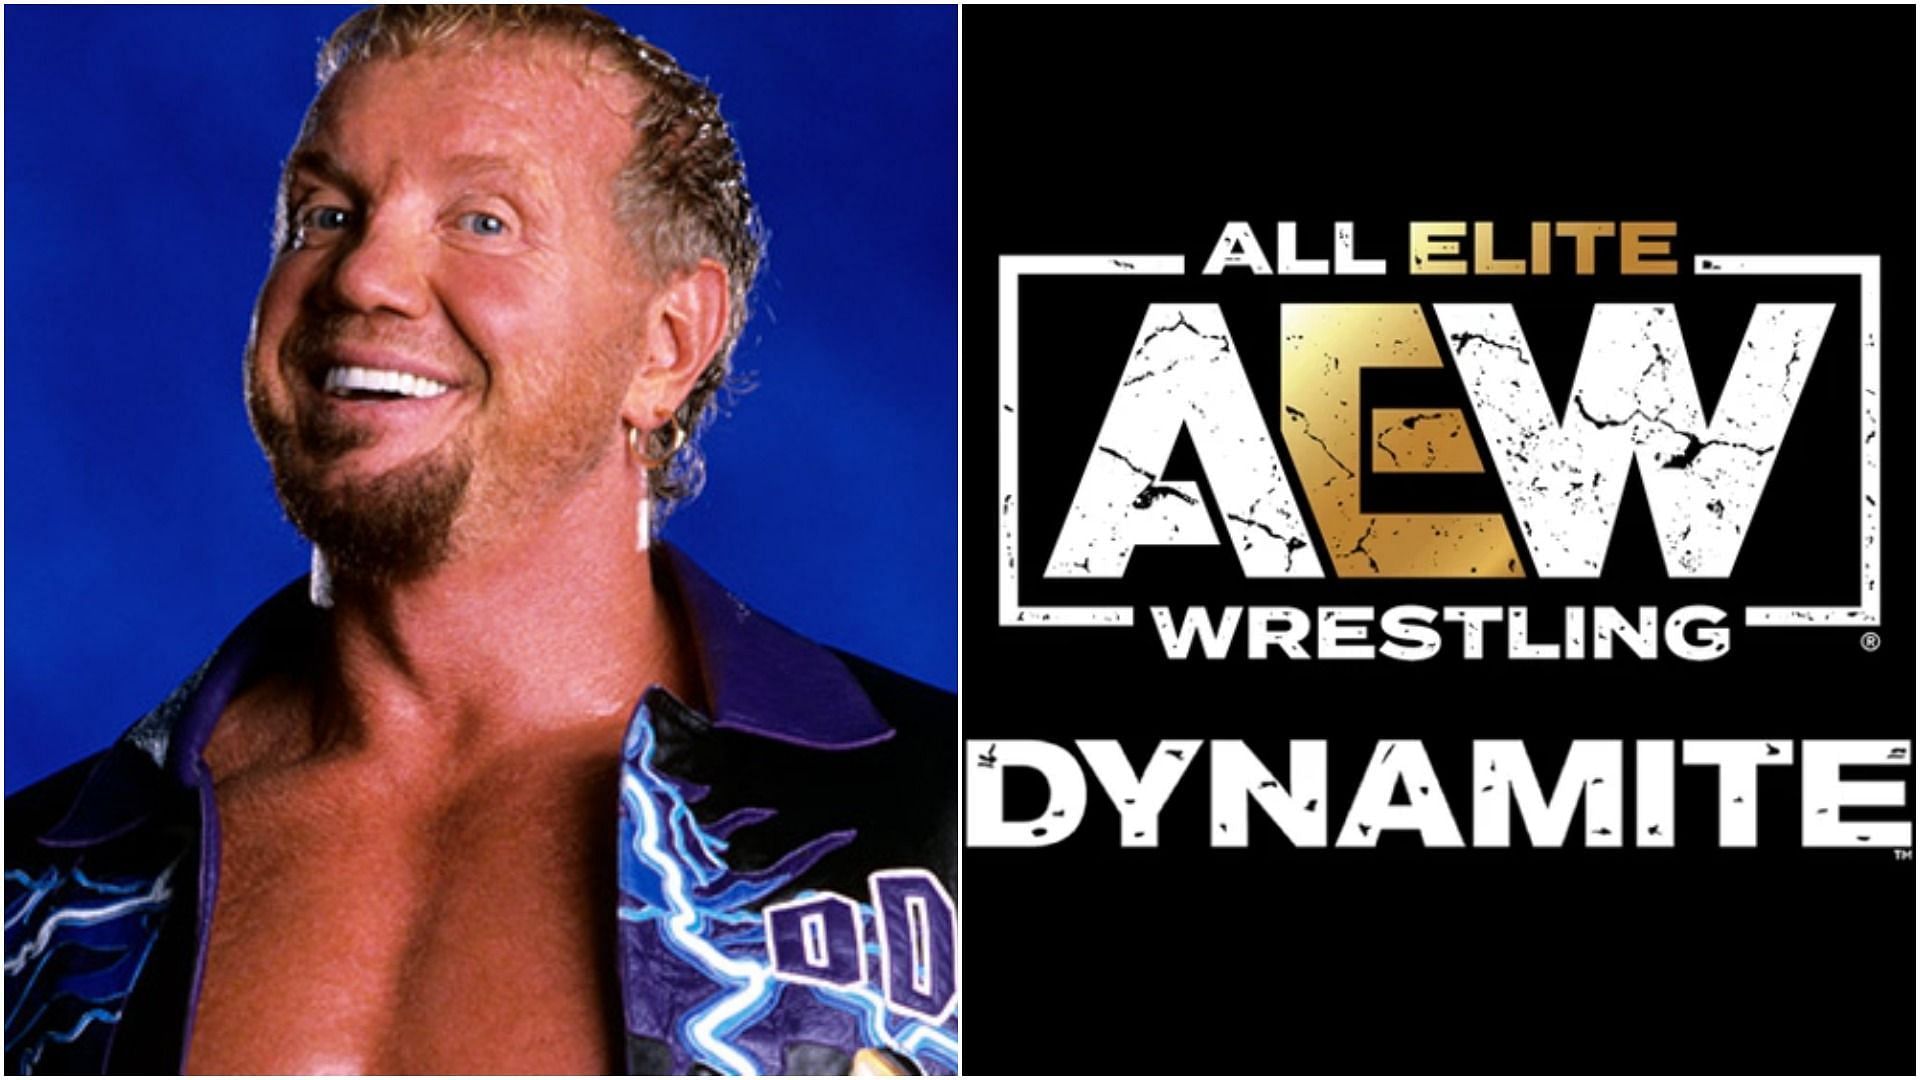 Diamond Dallas Page has featured in AEW in the past